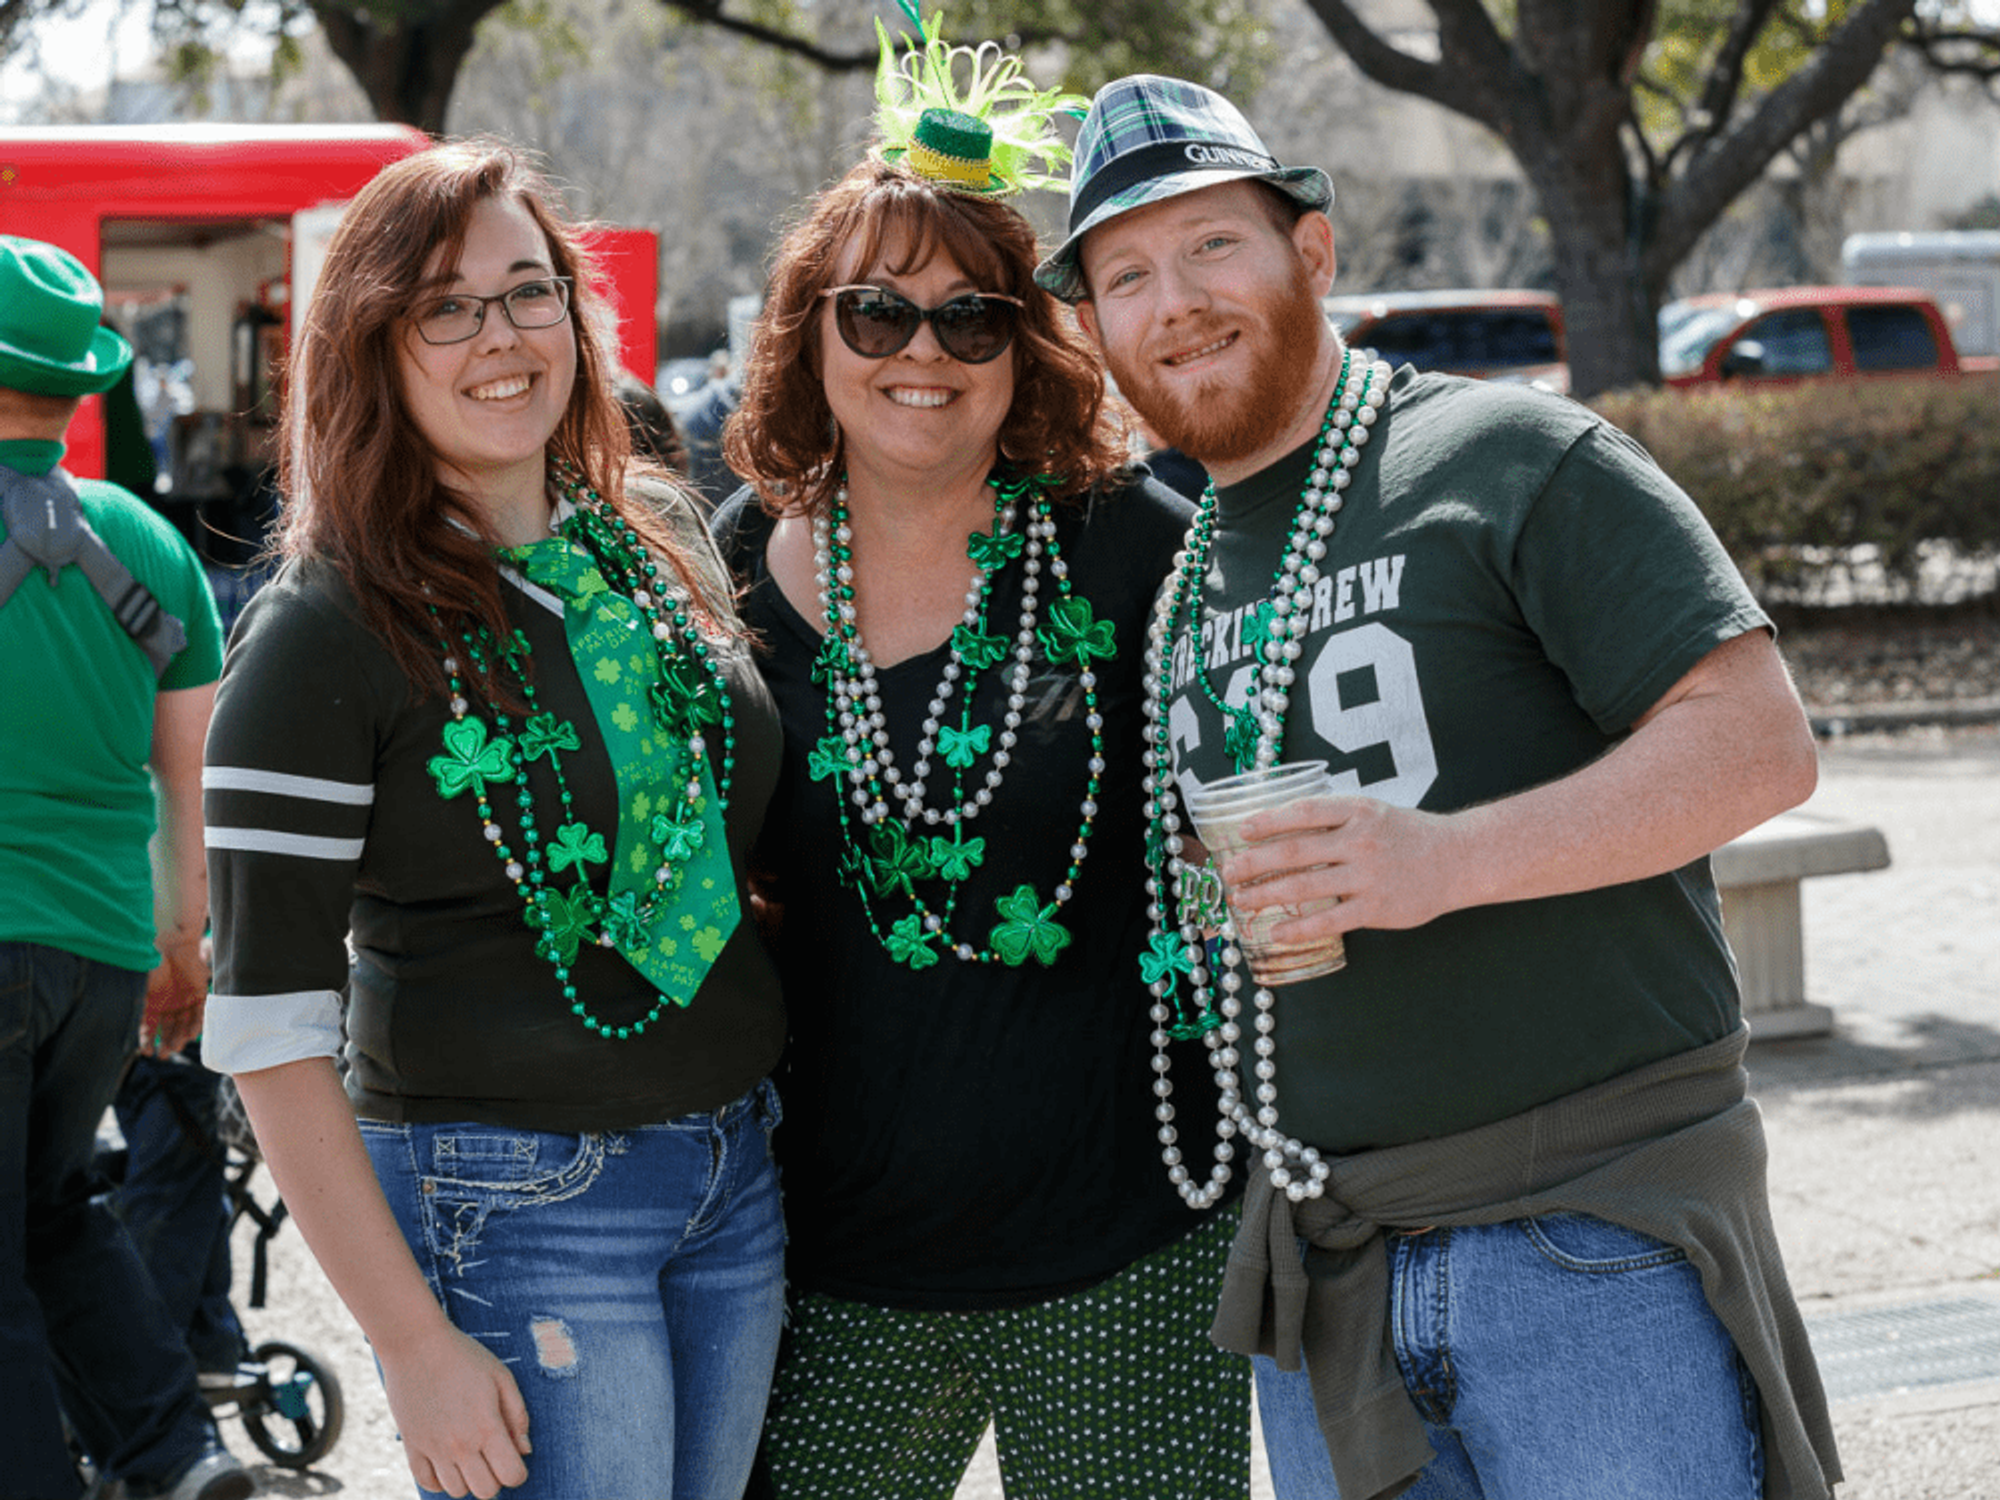 The North Texas Irish Festival takes place at Fair Park, March 3-5.